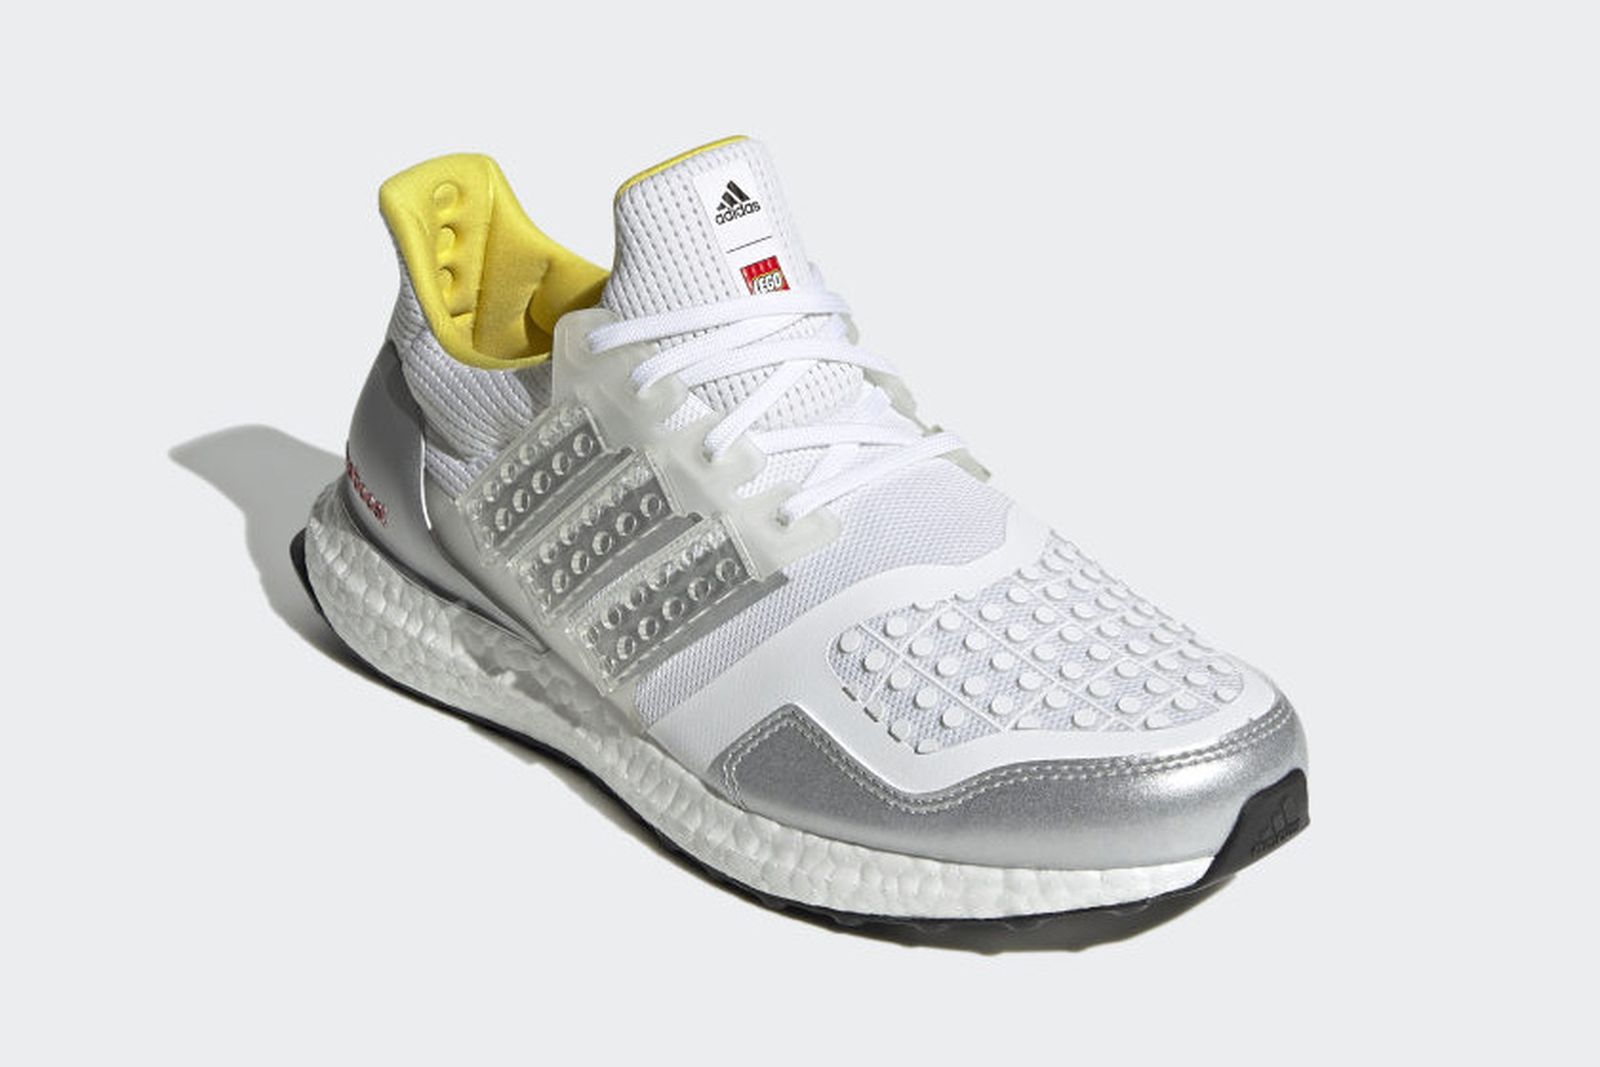 lego-adidas-ultraboost-dna-release-date-price-05